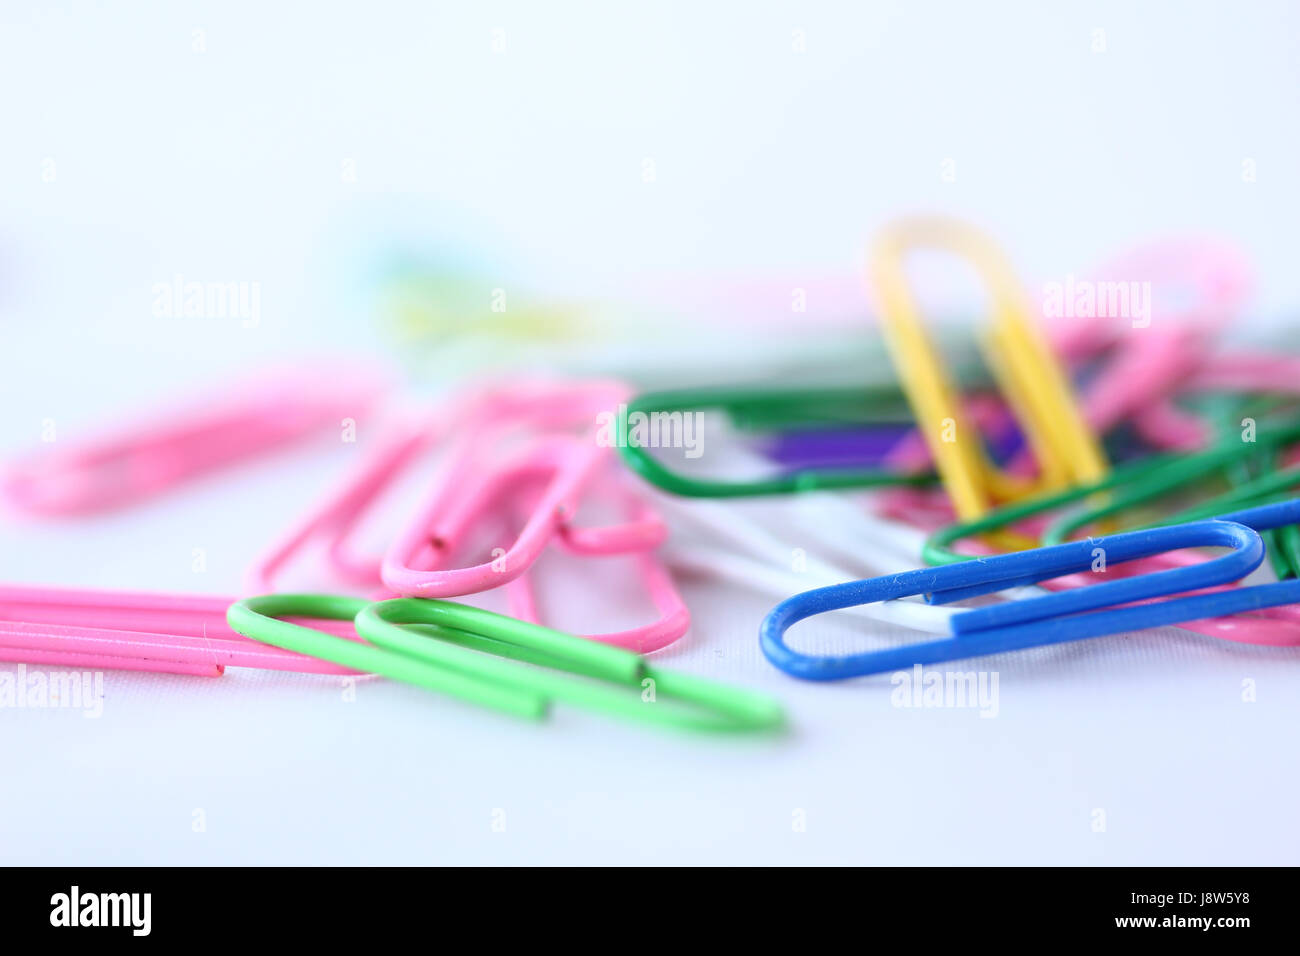 connect,fix,staples,stationary,attach,together,office,multi coloured,fastener Stock Photo